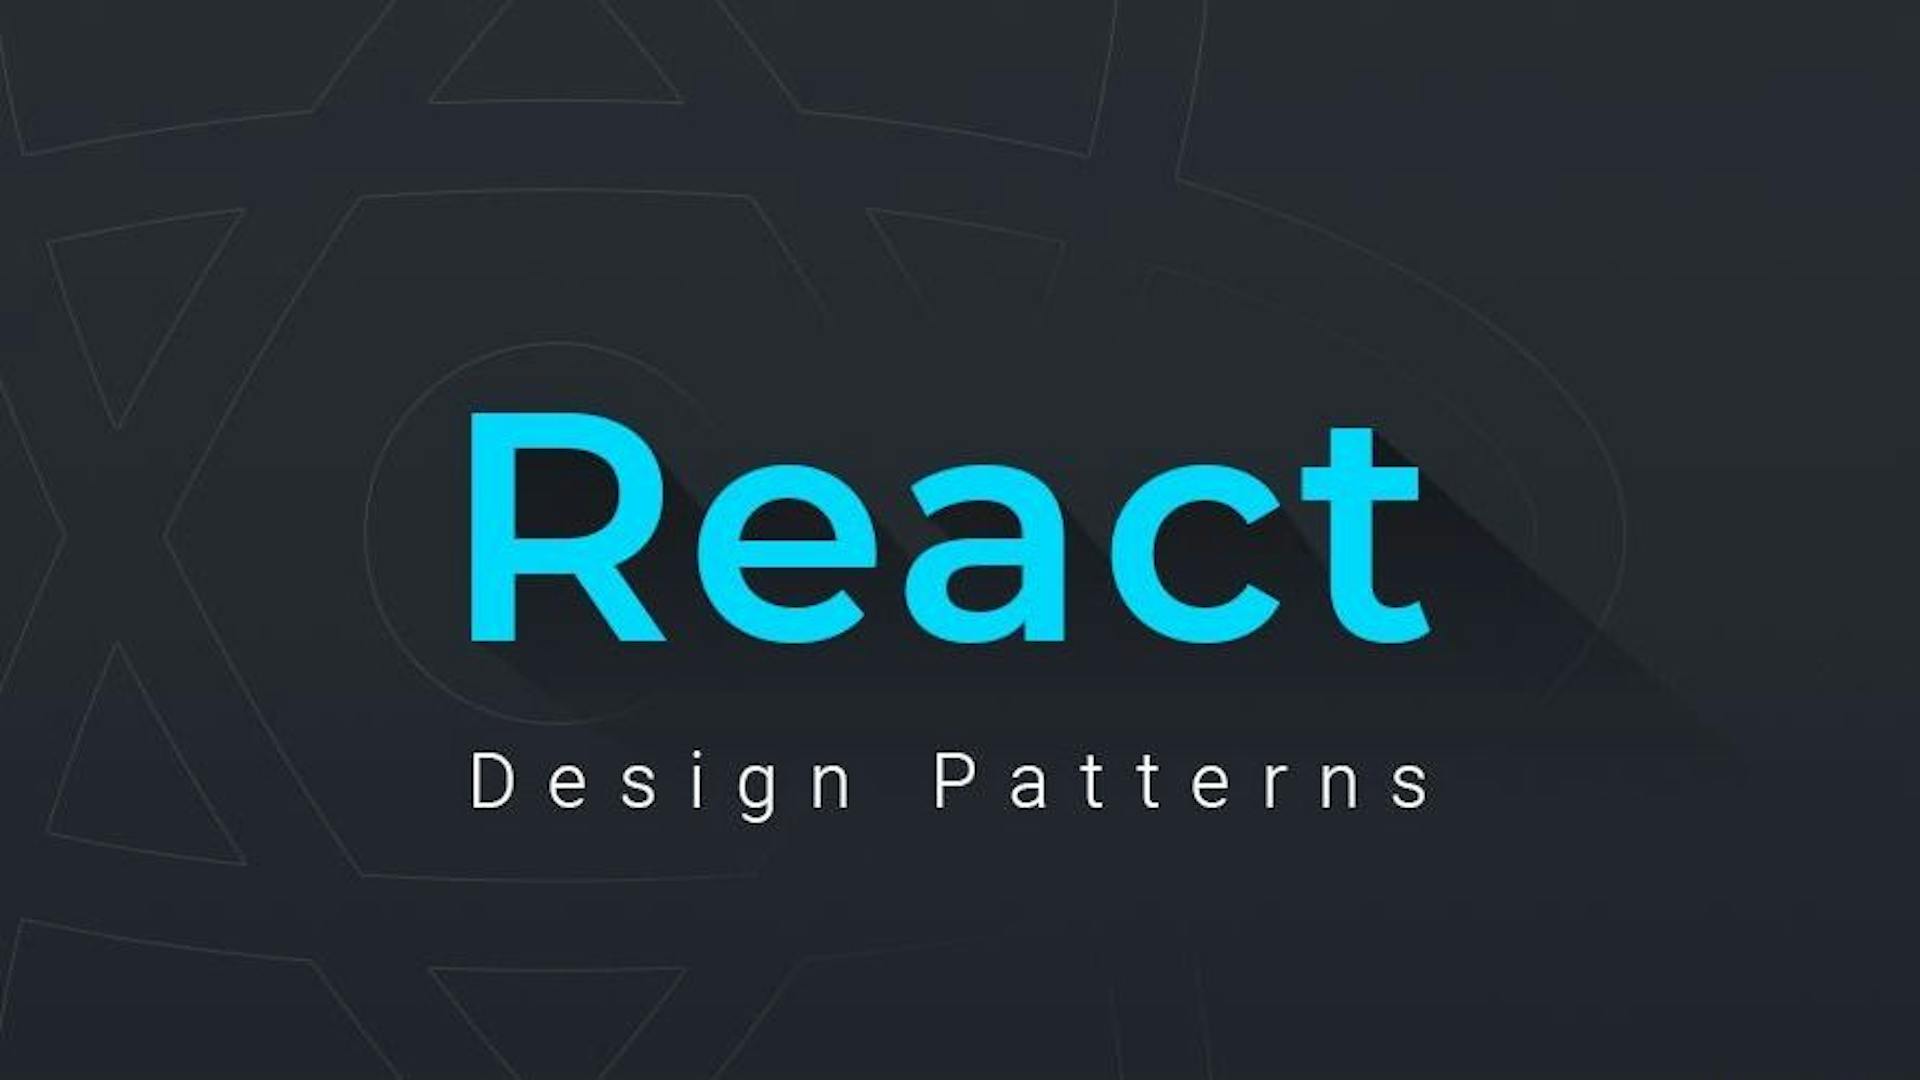 featured image - Crucial React Design Patterns Every Dev Should Know